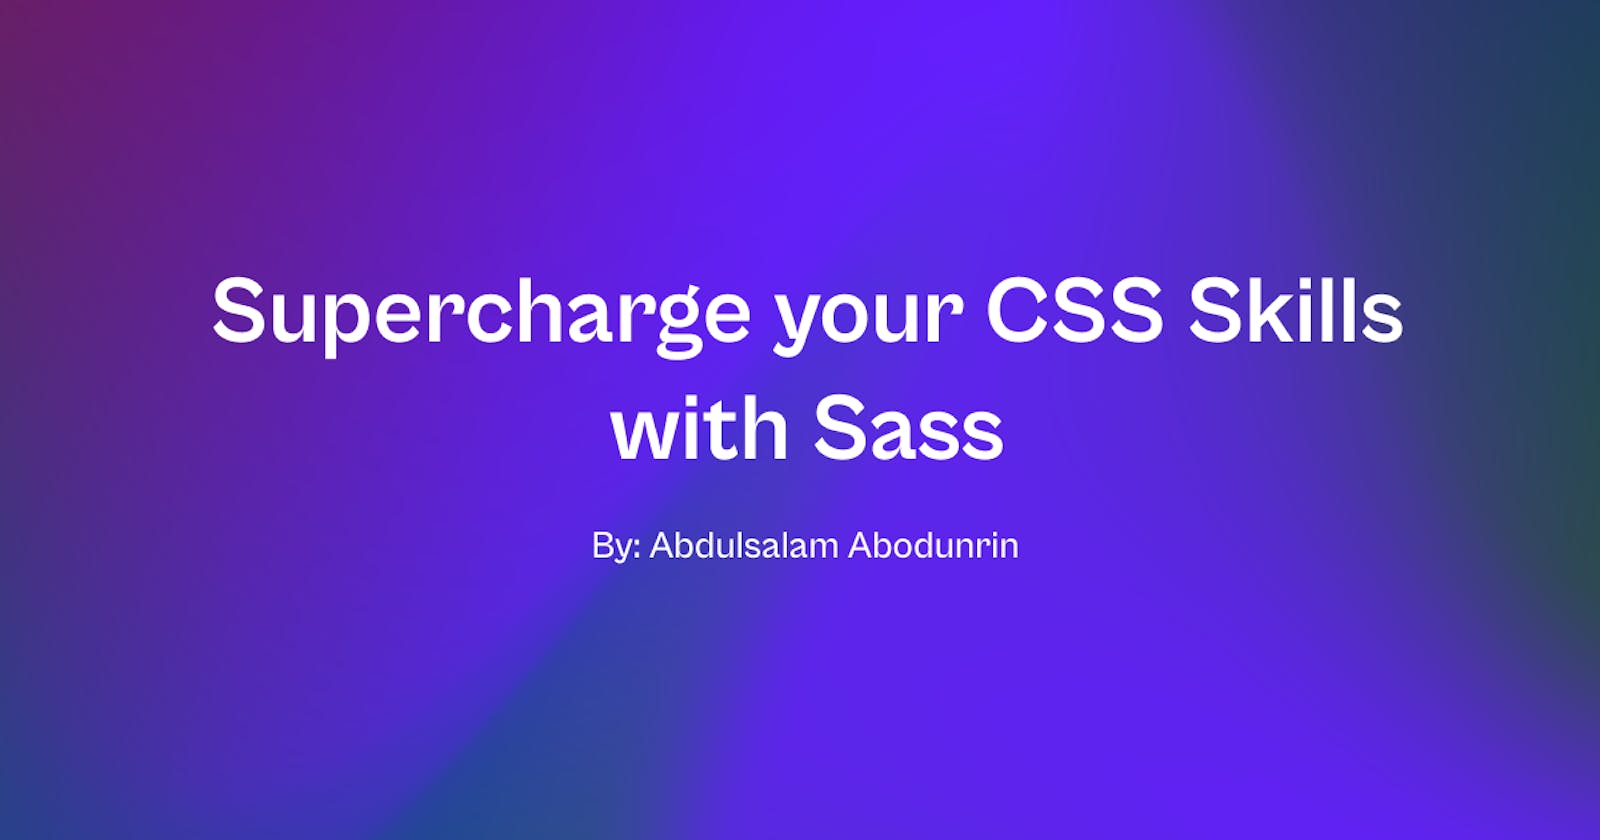 Supercharge your CSS Skills with Sass